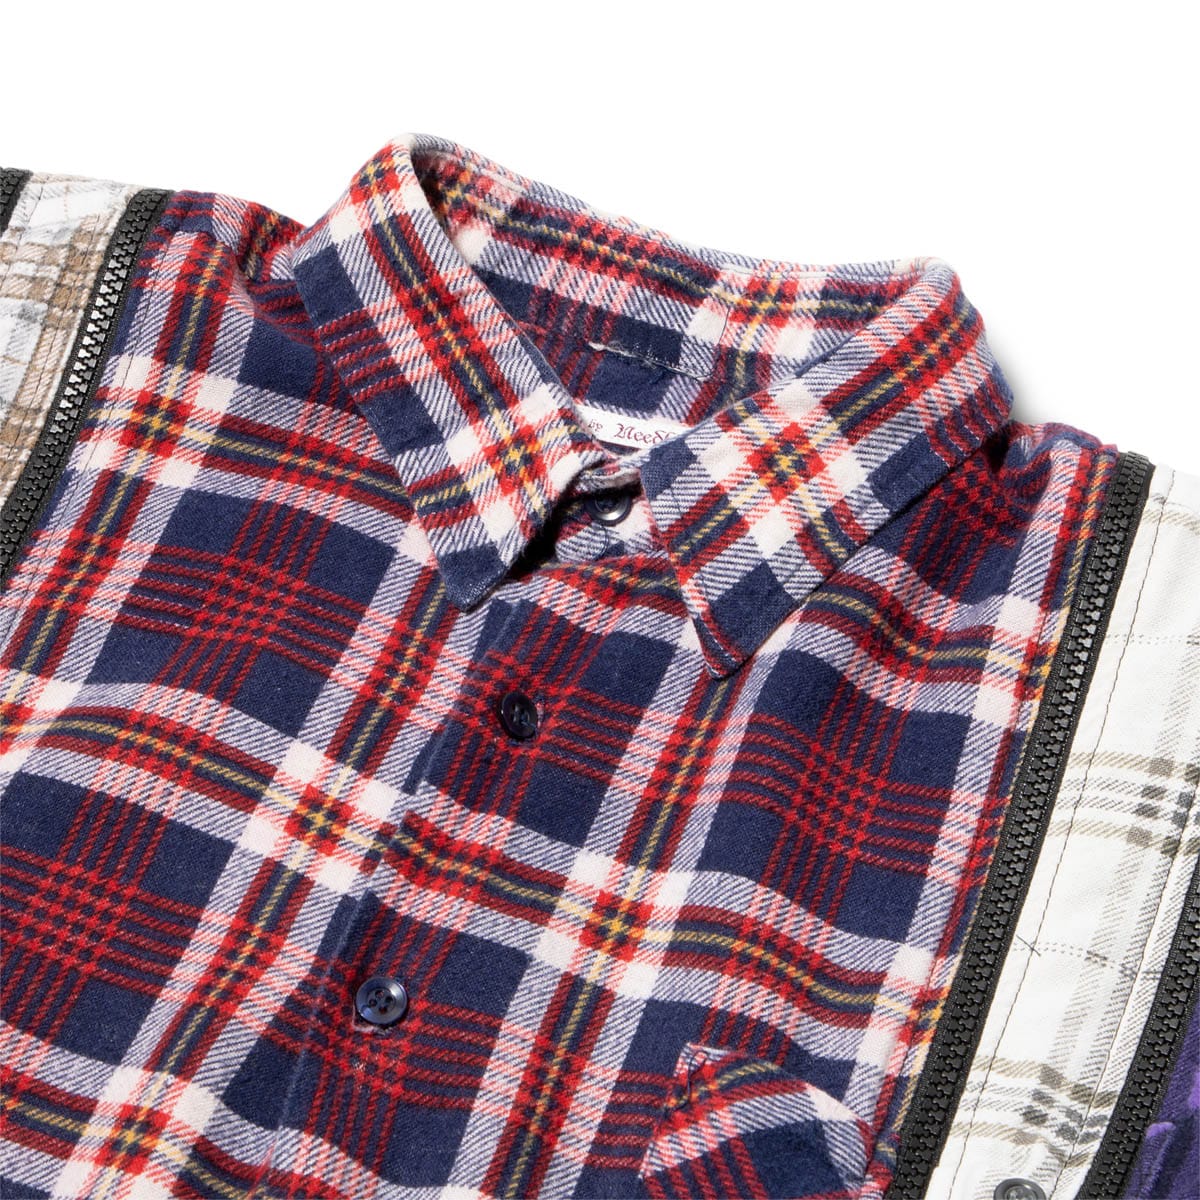 Needles Shirts ASSORTED / O/S 7 CUTS ZIPPED WIDE FLANNEL SHIRT SS21 24